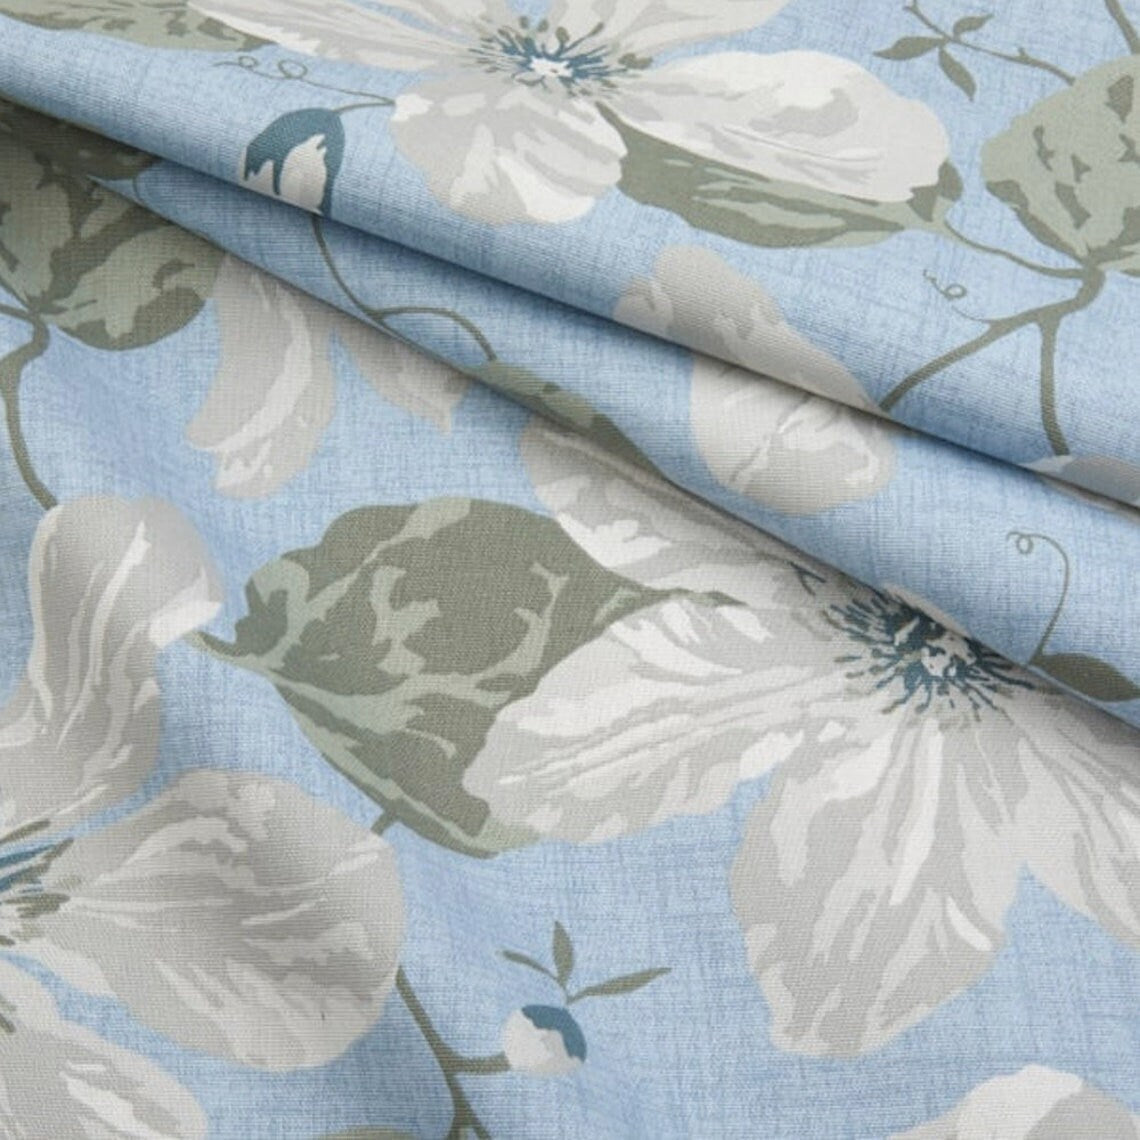 pillow sham in nelly antique blue floral, large scale